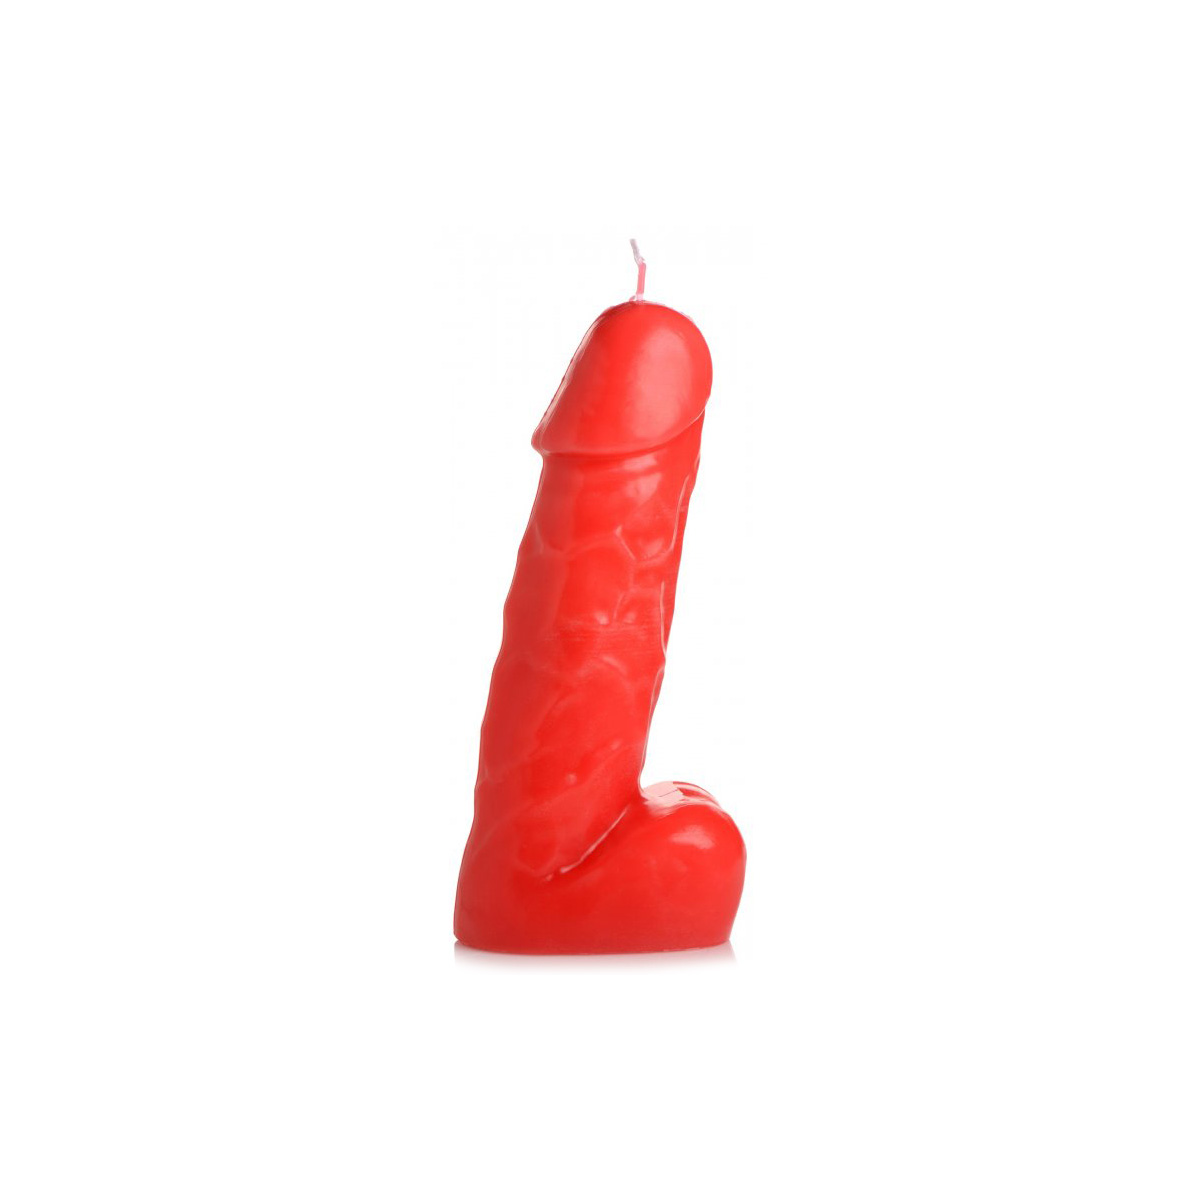 Spicy-Pecker-Red-Dick-Drip-Candle-118-XR-AG938-R-1